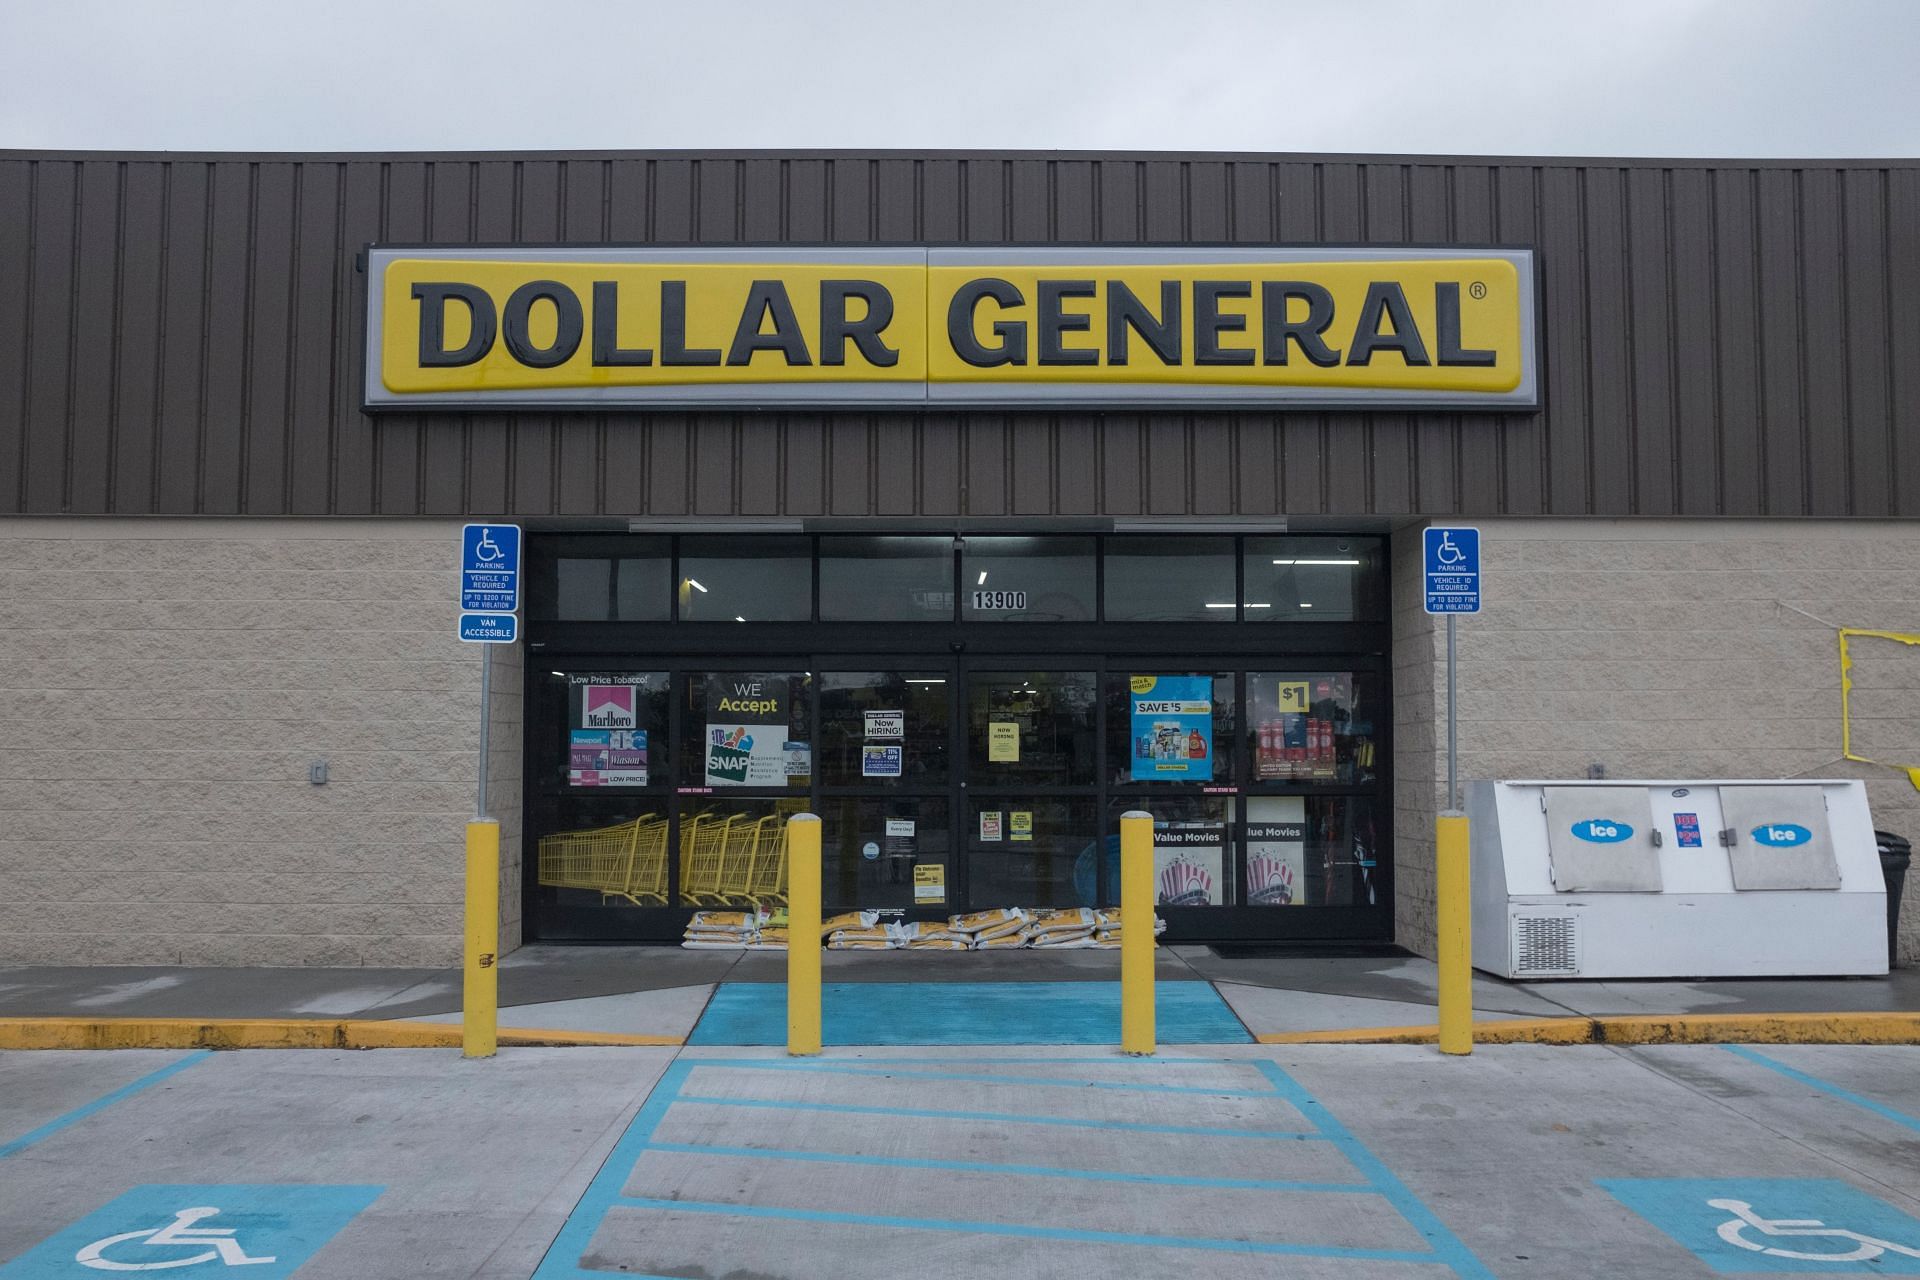 Social media users were left infuriated as a store manager chased a shoplifter and ultimately rammed her car in the thief. (Image via Dollar General)